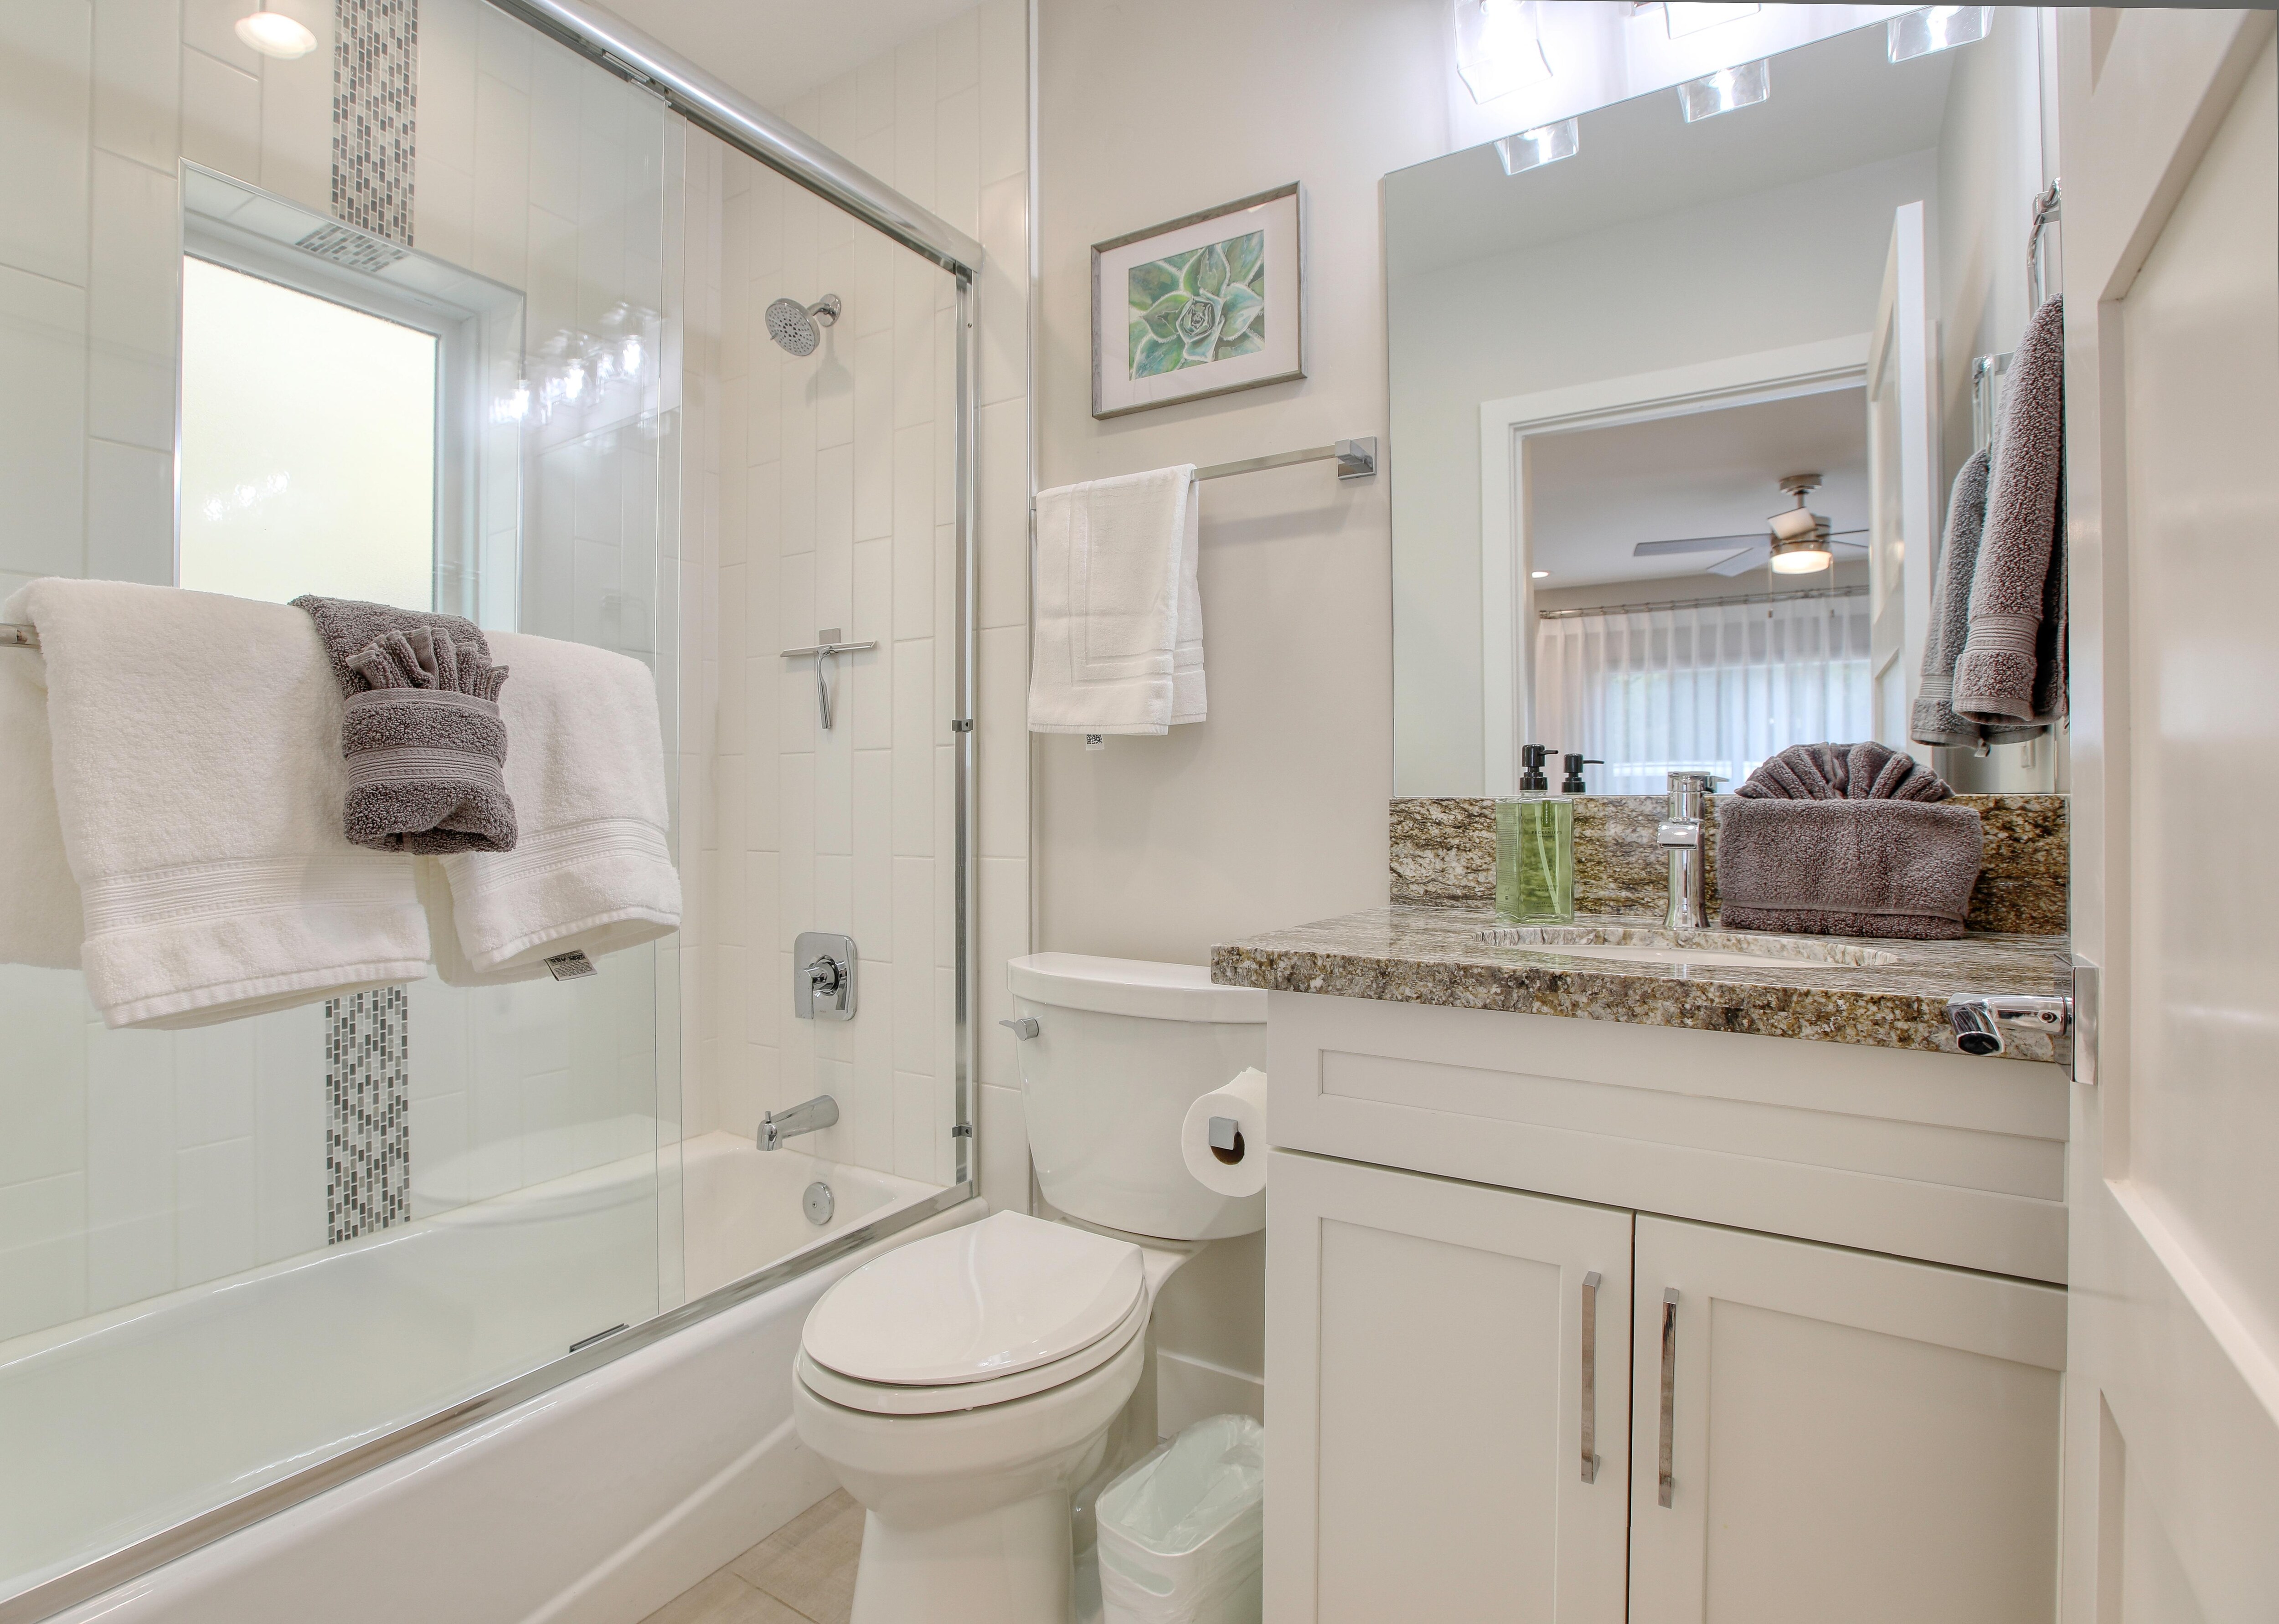 The first bedroom's ensuite bathroom has a tub/shower combination